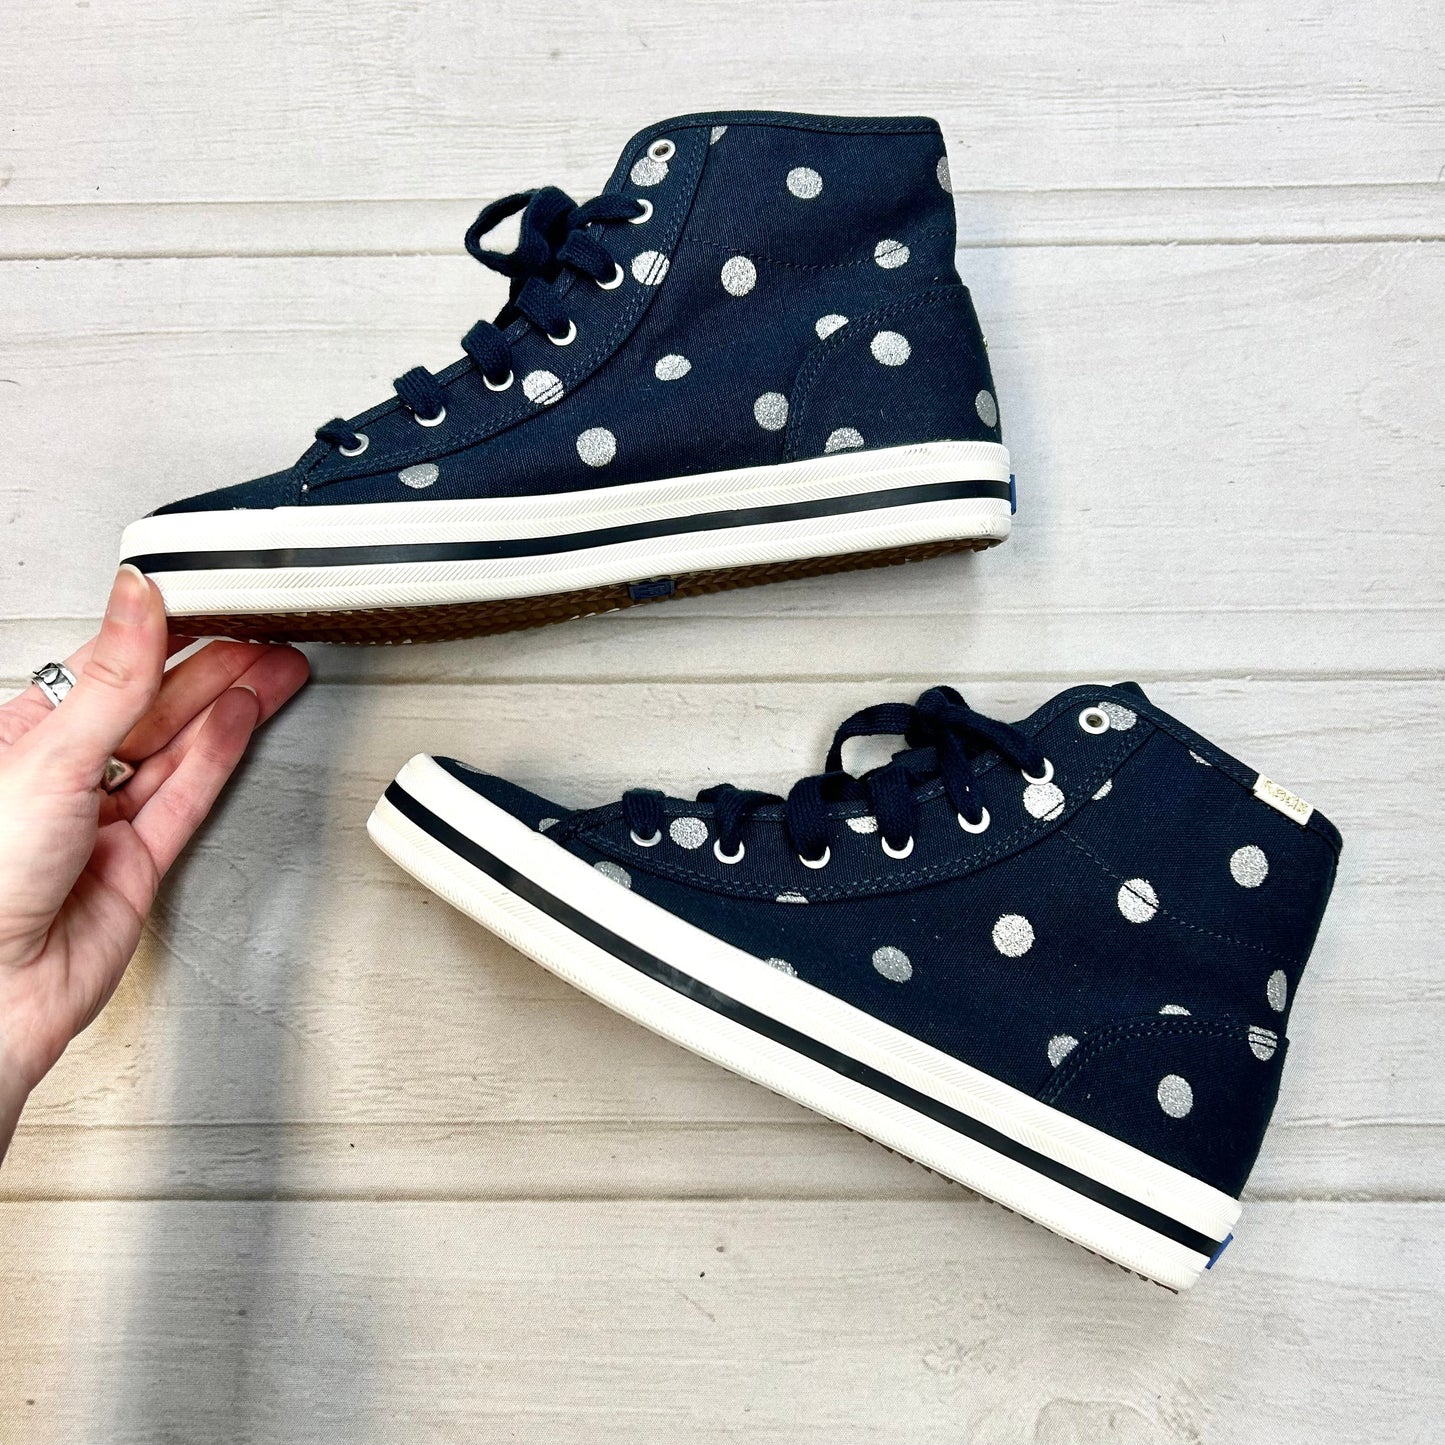 Shoes Sneakers By Keds x Kate Spade Size: 6